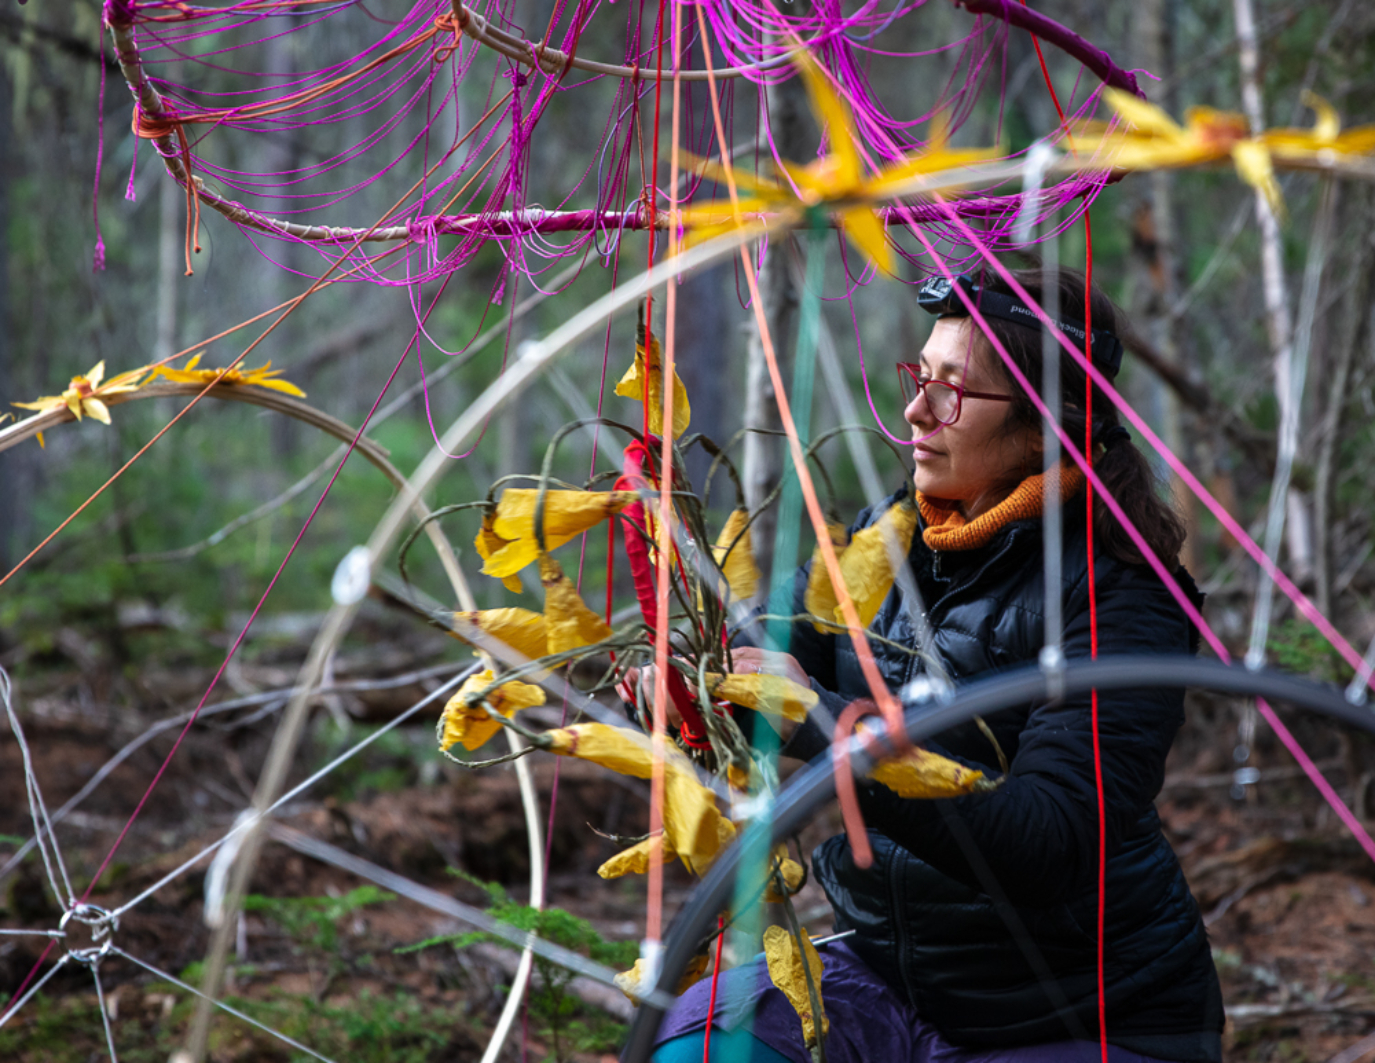 The artist sits to the right, facing left, with a smile, making last fixes to the Dream Puppet. There are bamboo arcs and curves everywhere, with yellow flowers, pink and and purple string. In the blurred background, the forest of Montana's Yaak Valley looms.